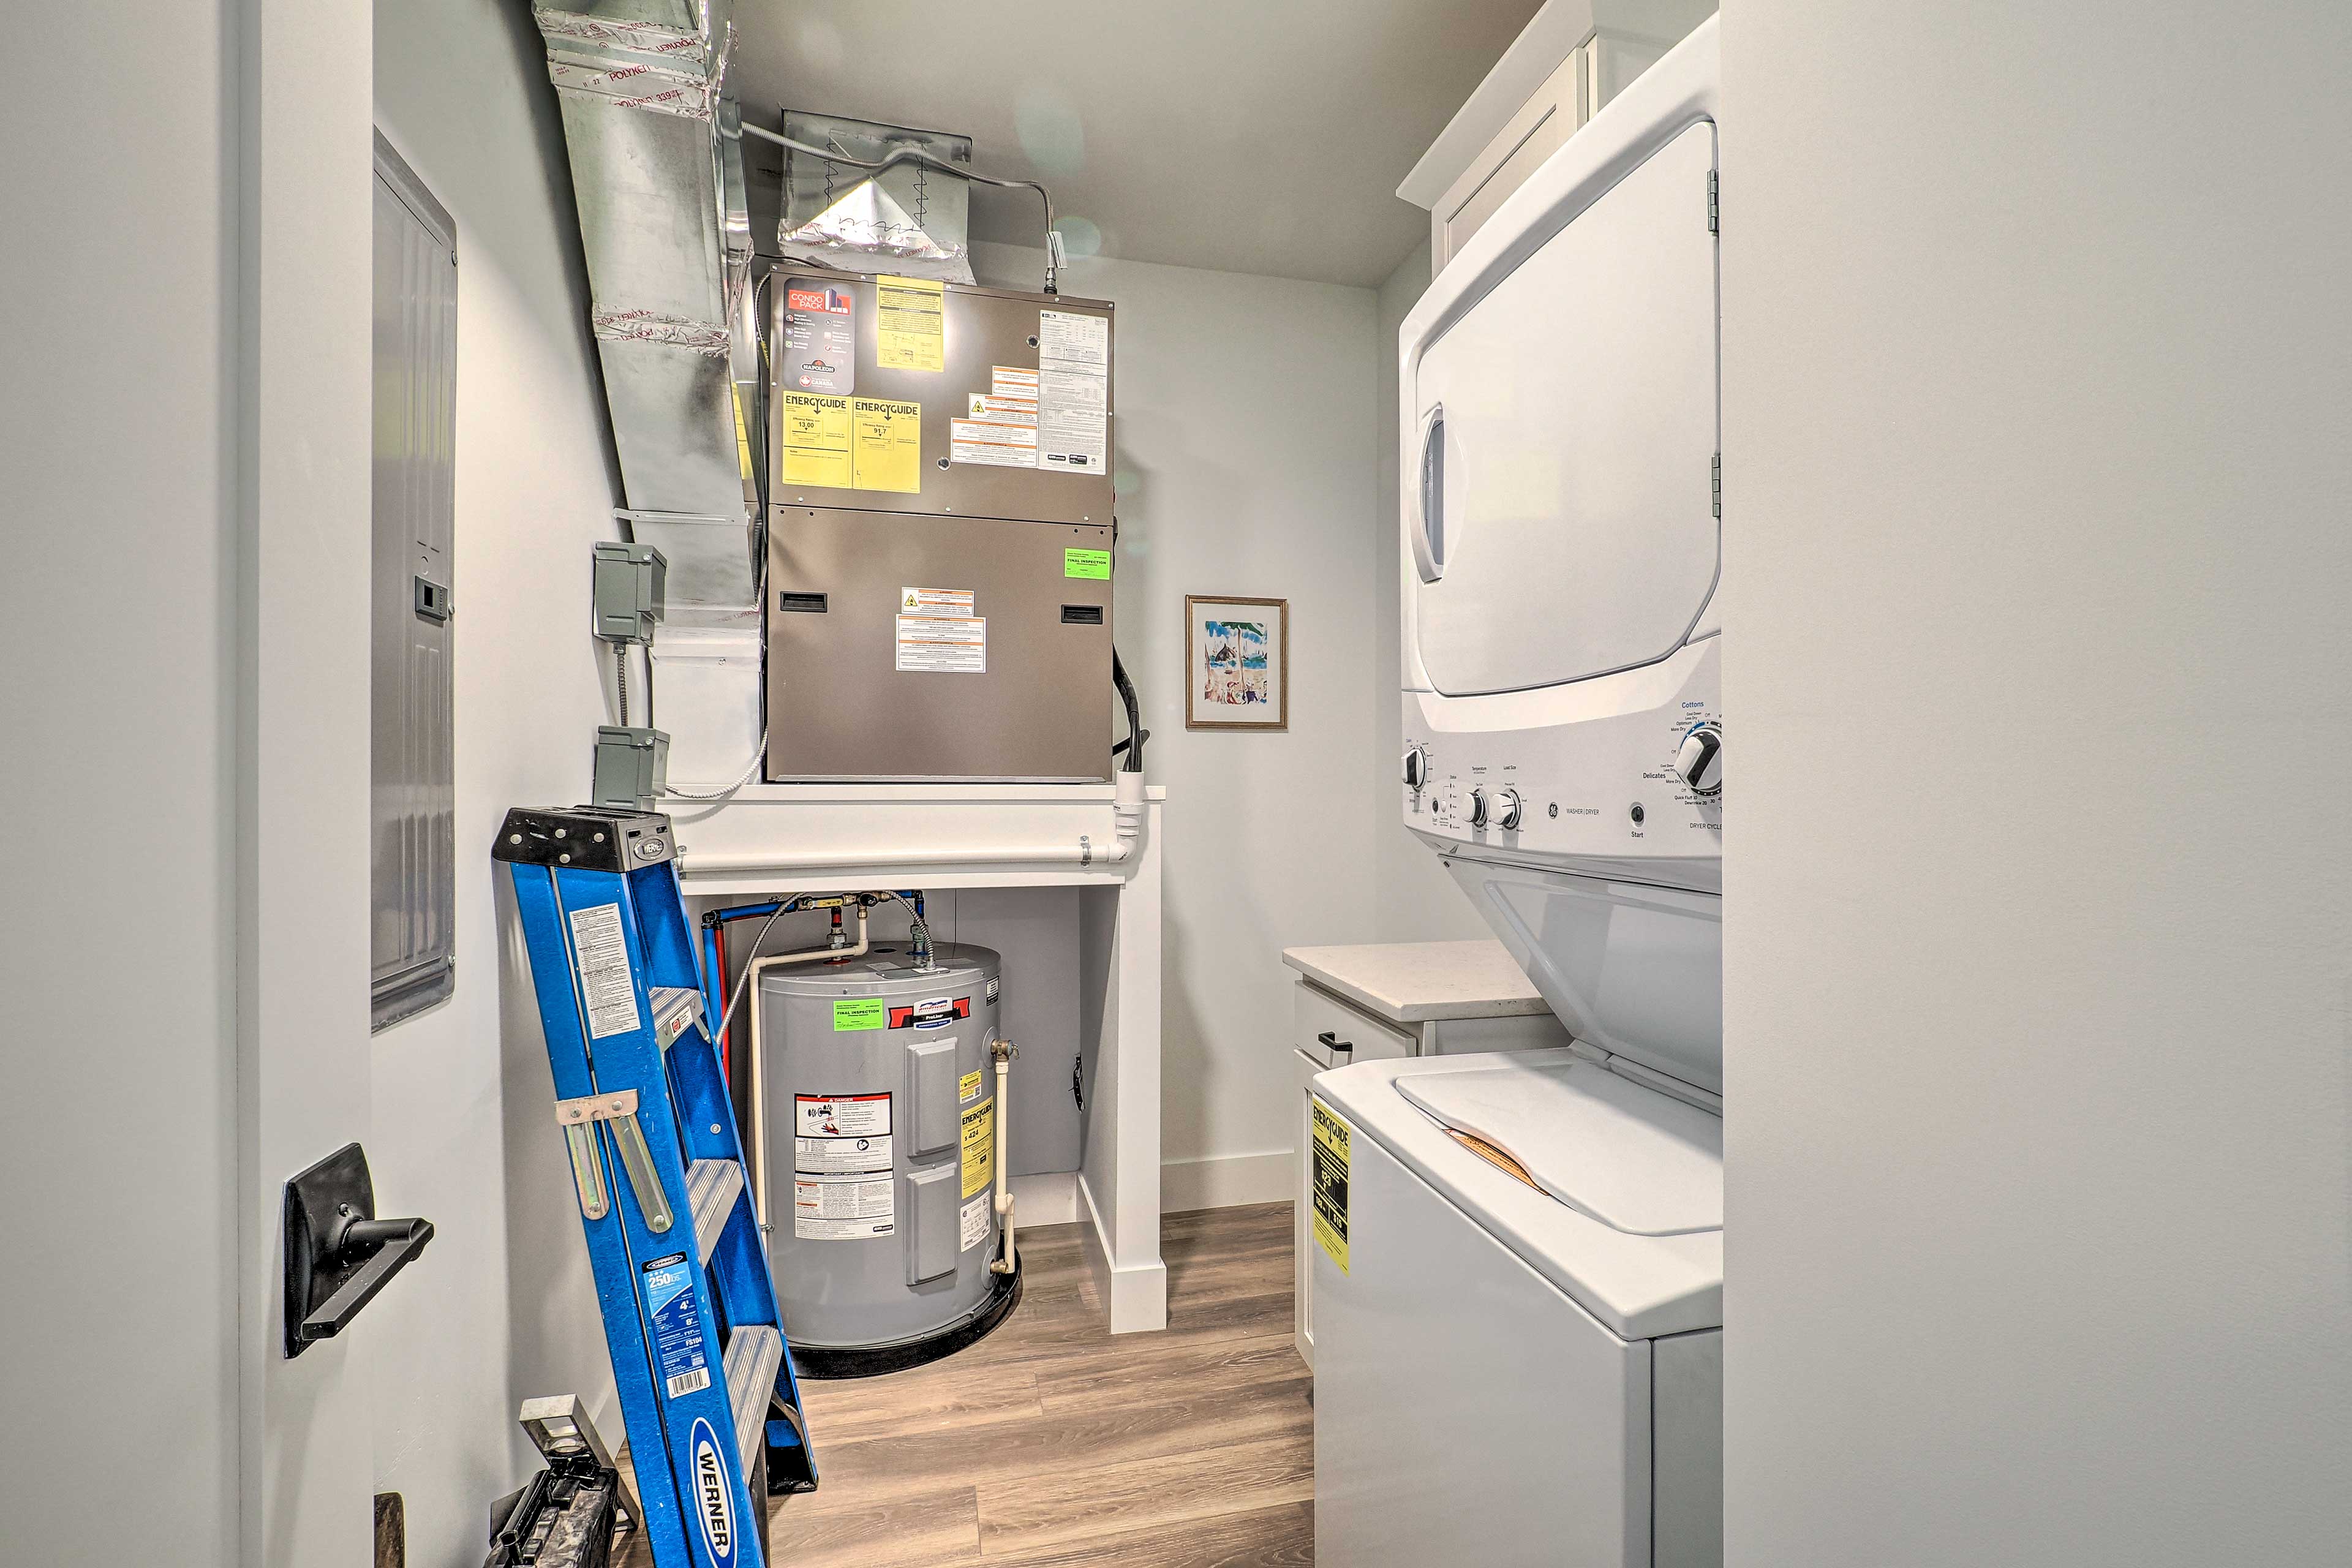 Laundry Area | Washer/Dryer | Iron/Board | Hangers